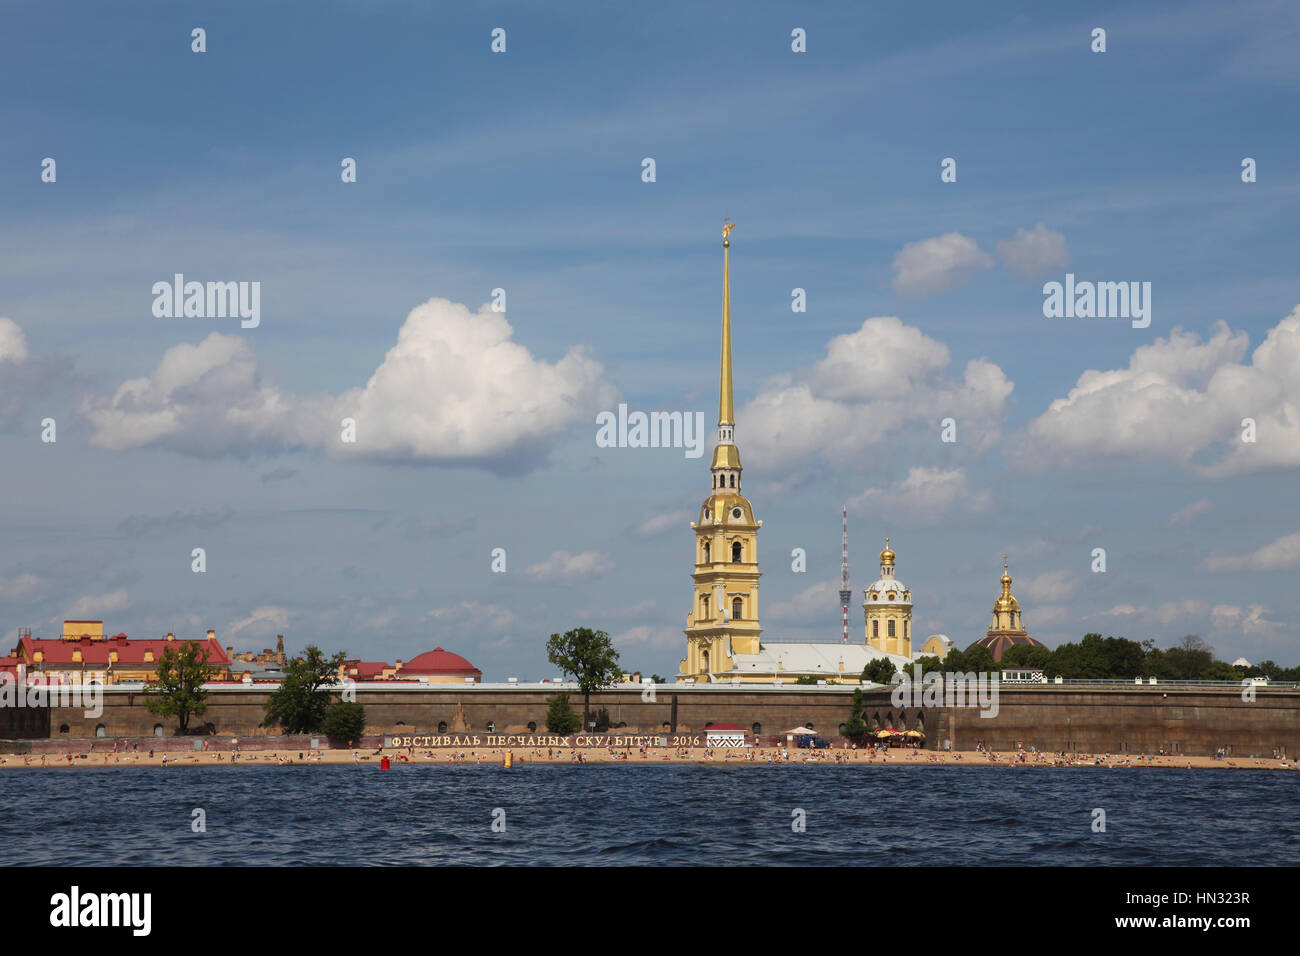 Saints Peter and Paul Cathedral, Saint Petersburg, Russia Stock Photo